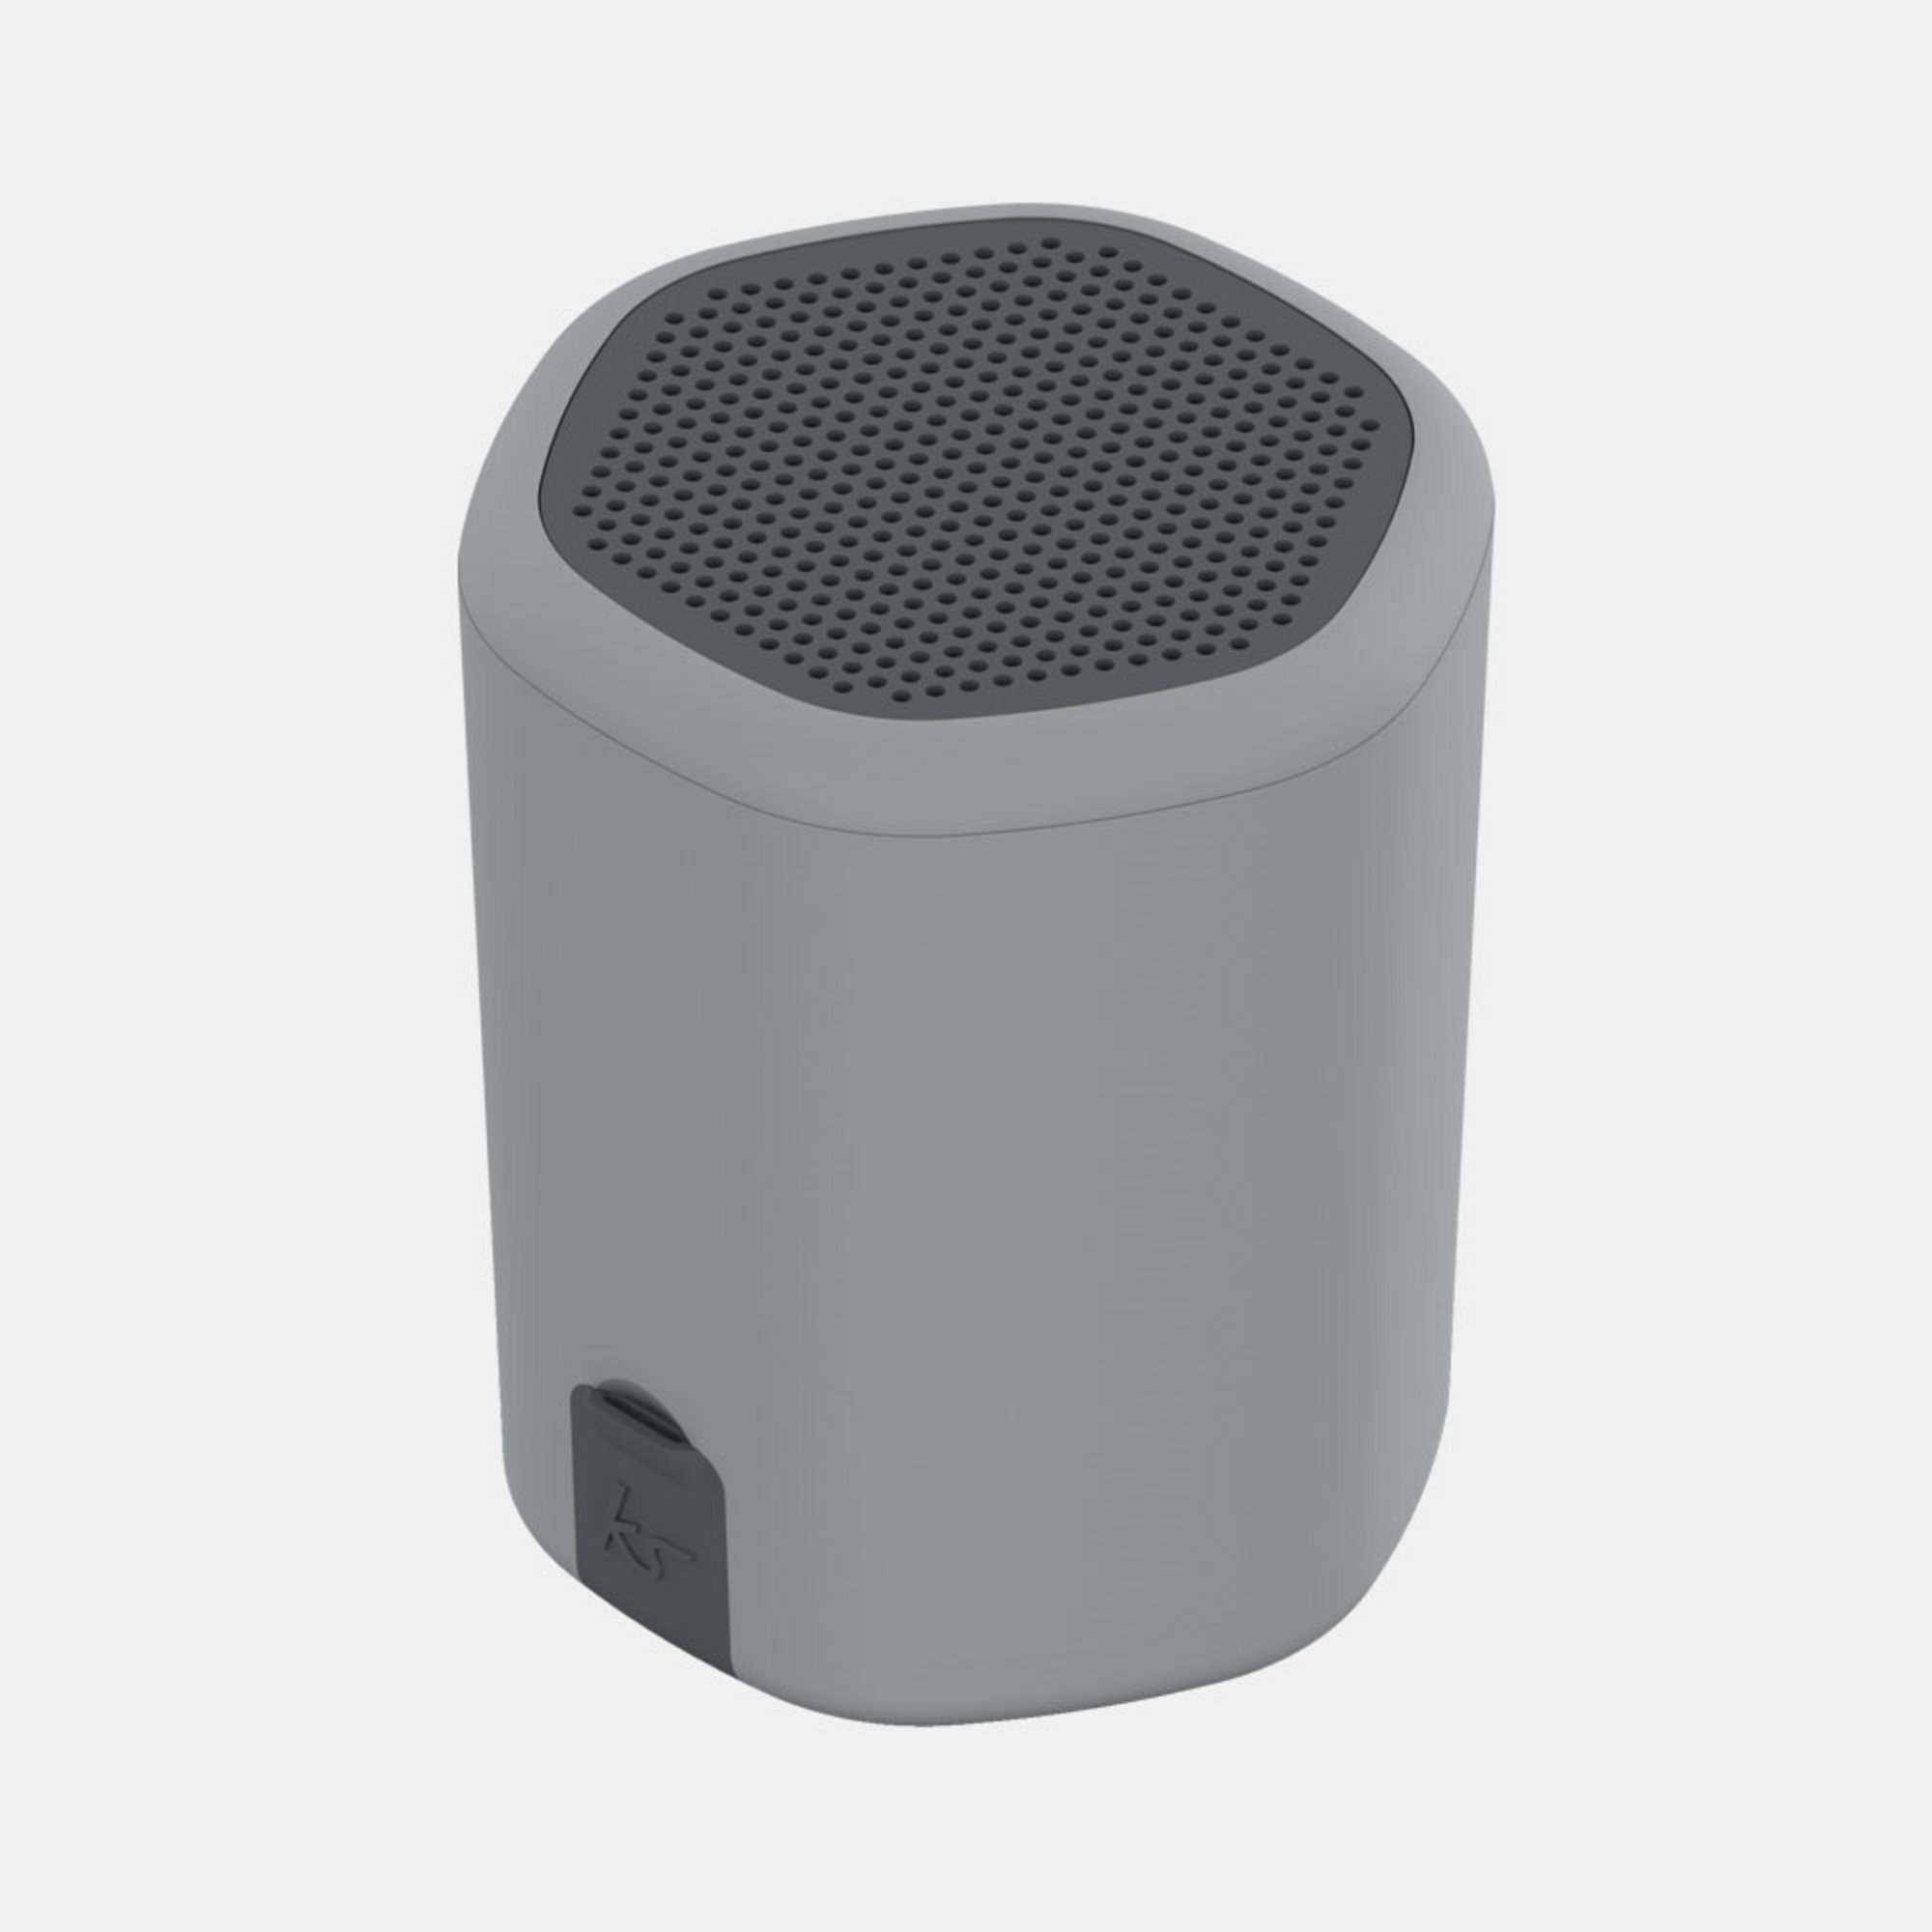 View more Hive 2.0 Bluetooth Speaker Grey details